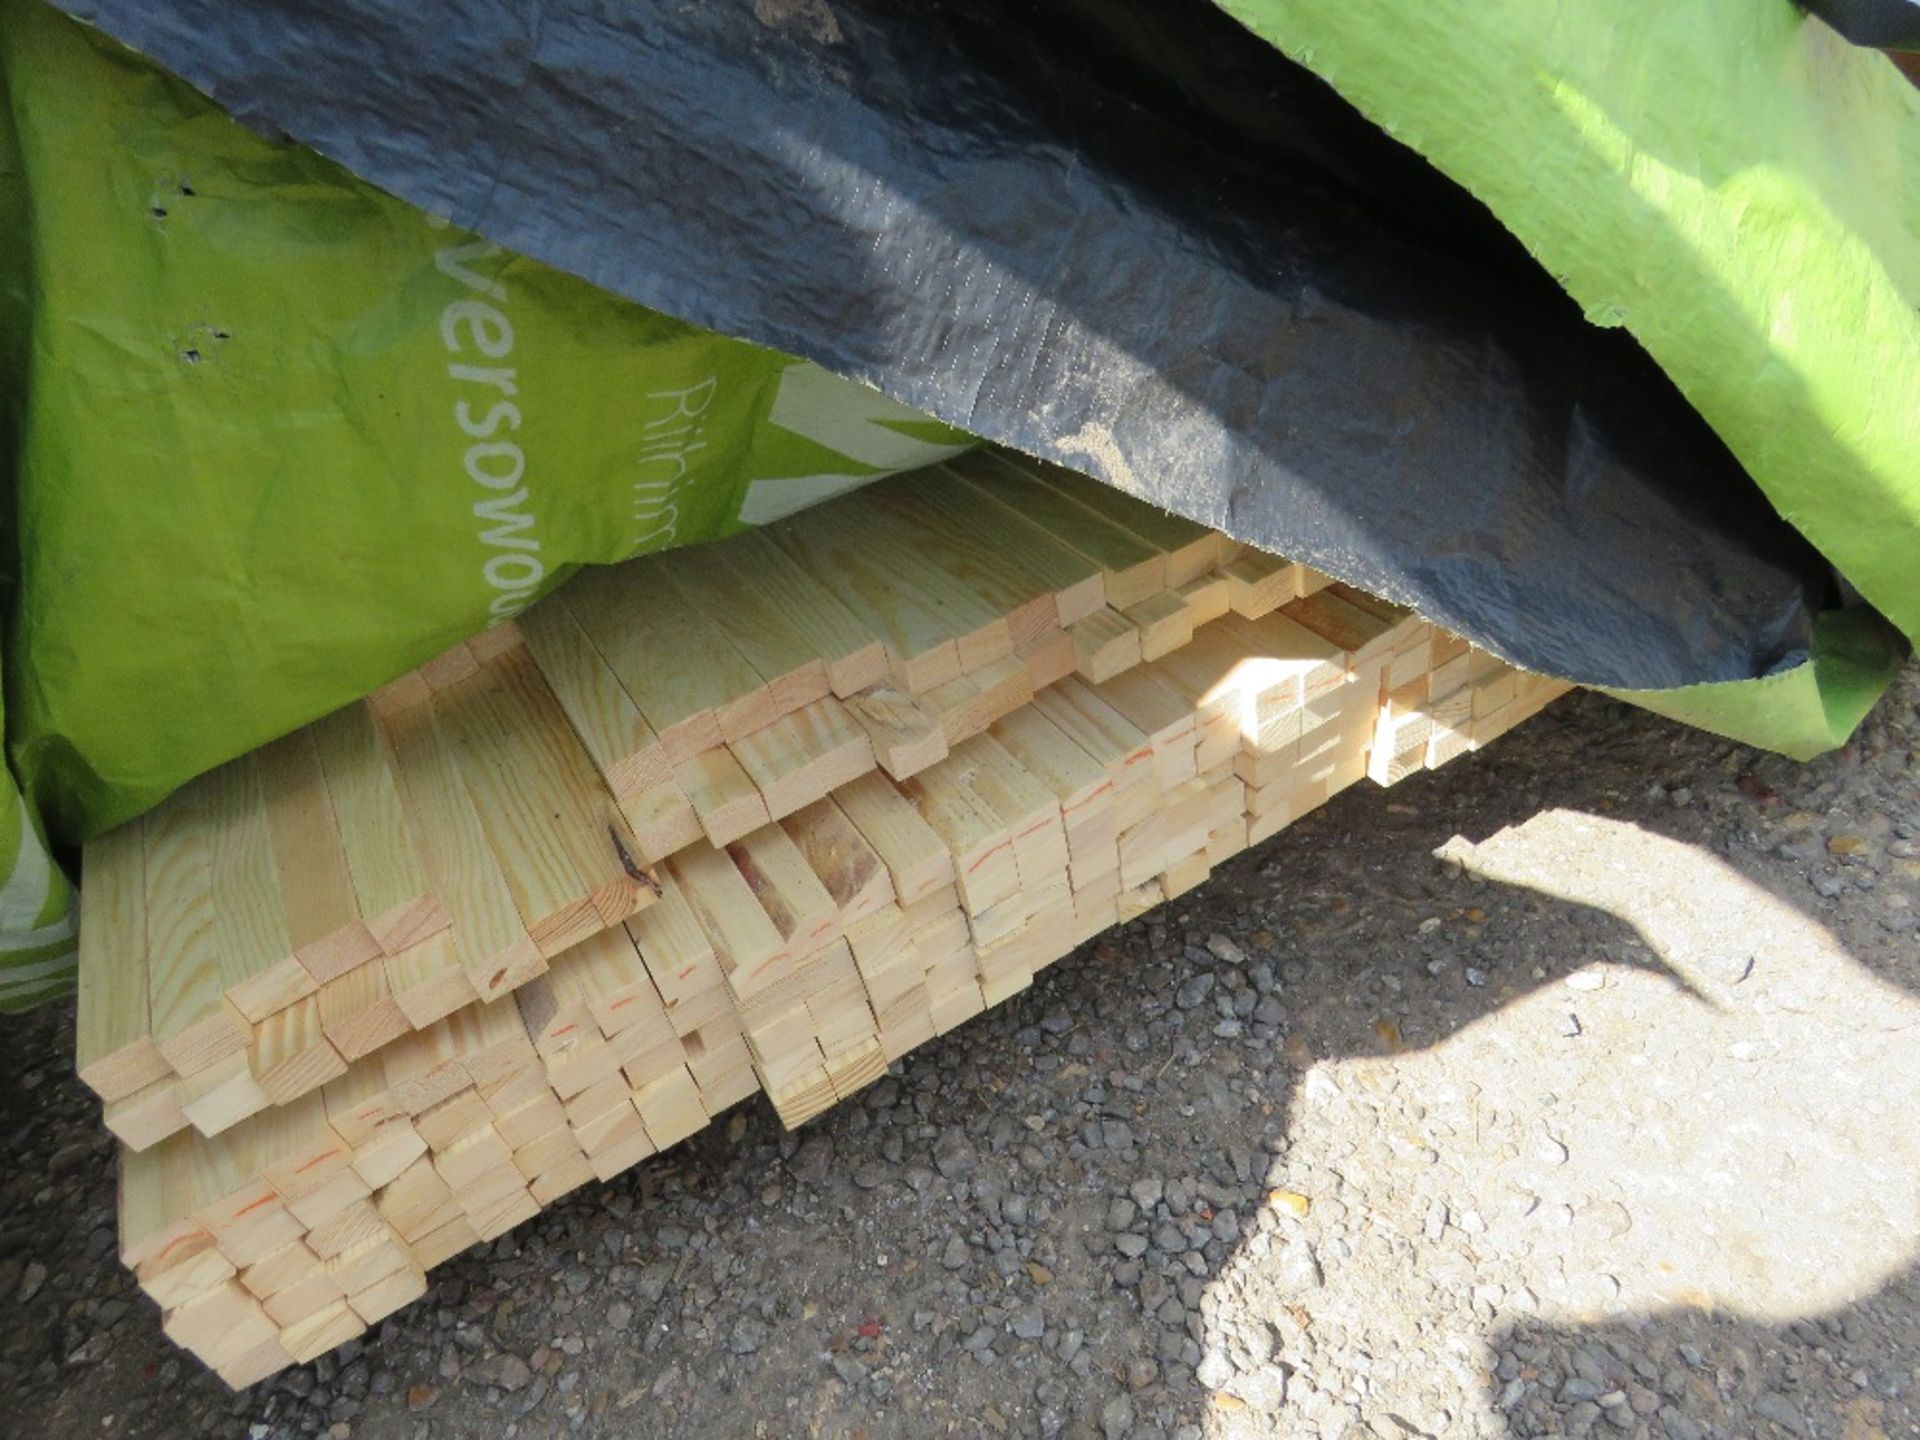 ASSORTED TIMBER SLATS, BOARDS AND "U" PROFILE FENCE TIMBERS, 1.8M LENGTH APPROX. - Image 5 of 5